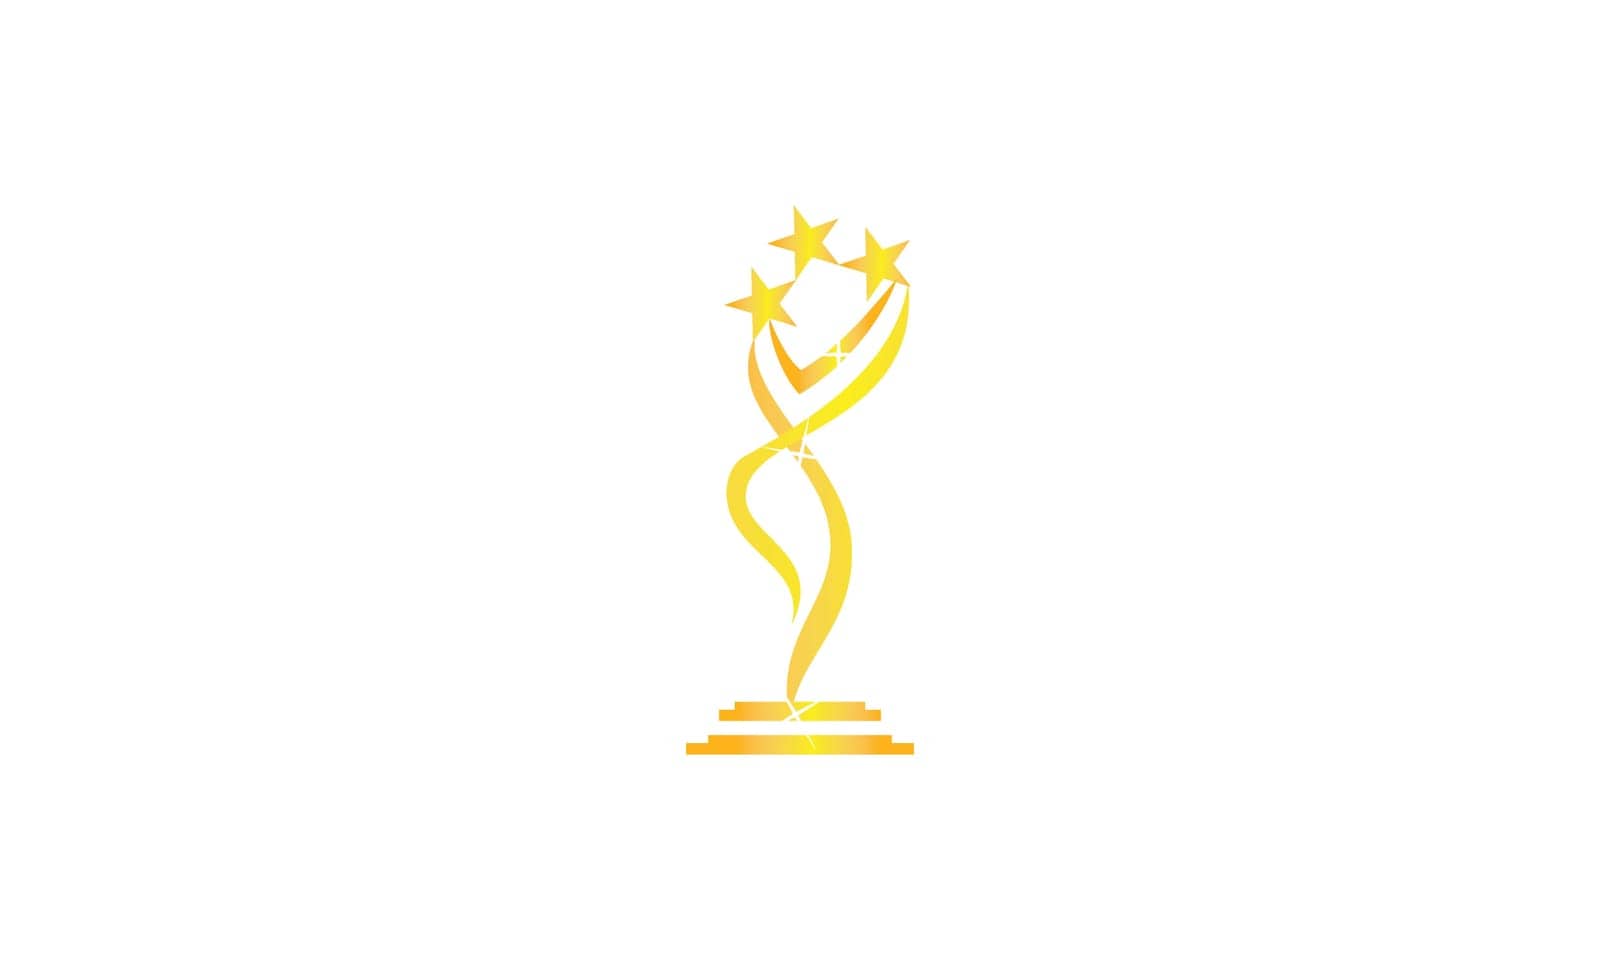 AWARD SUCCESS TROPHY Template by alluranet